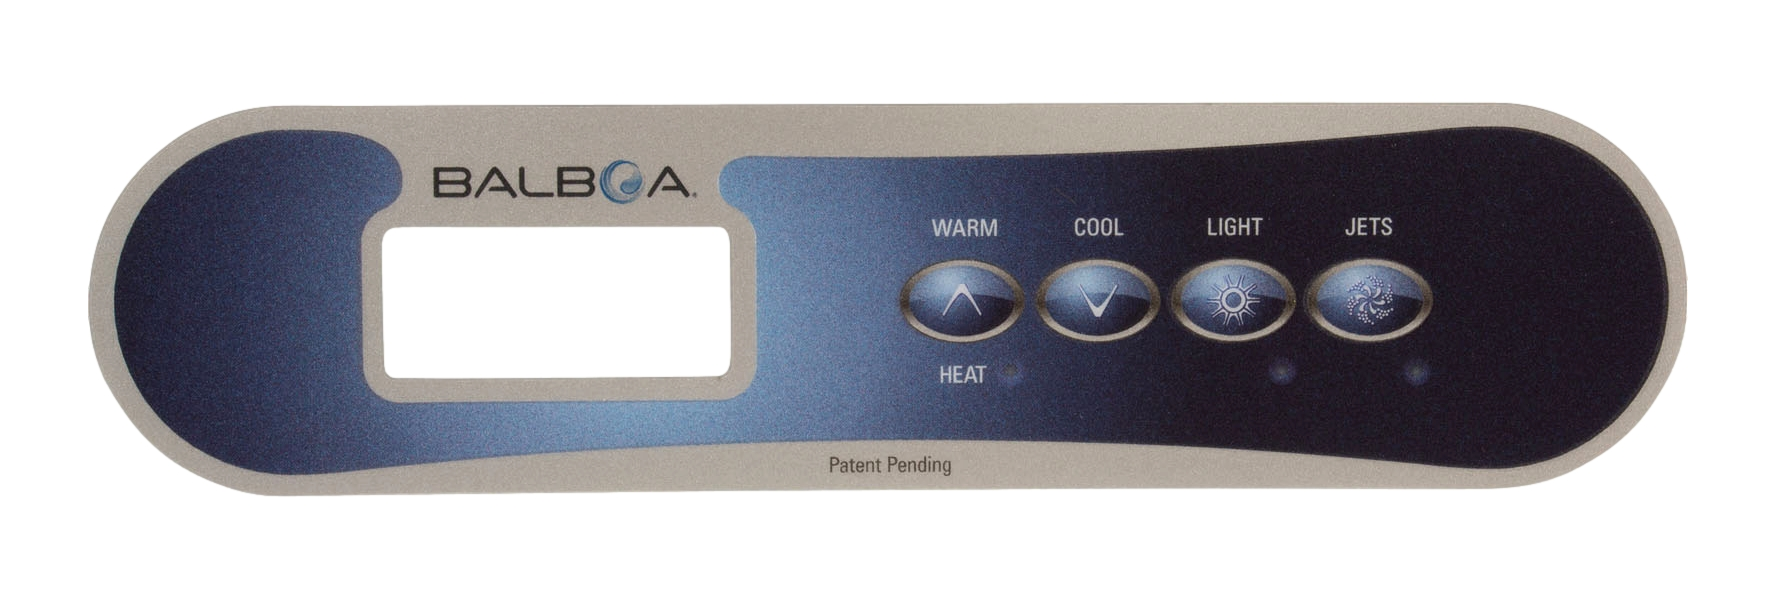 Balboa Water Group 12510 TP400W Overlay w/ 4 Buttons- Warm/Cool/Light/Jet - image 1 of 5